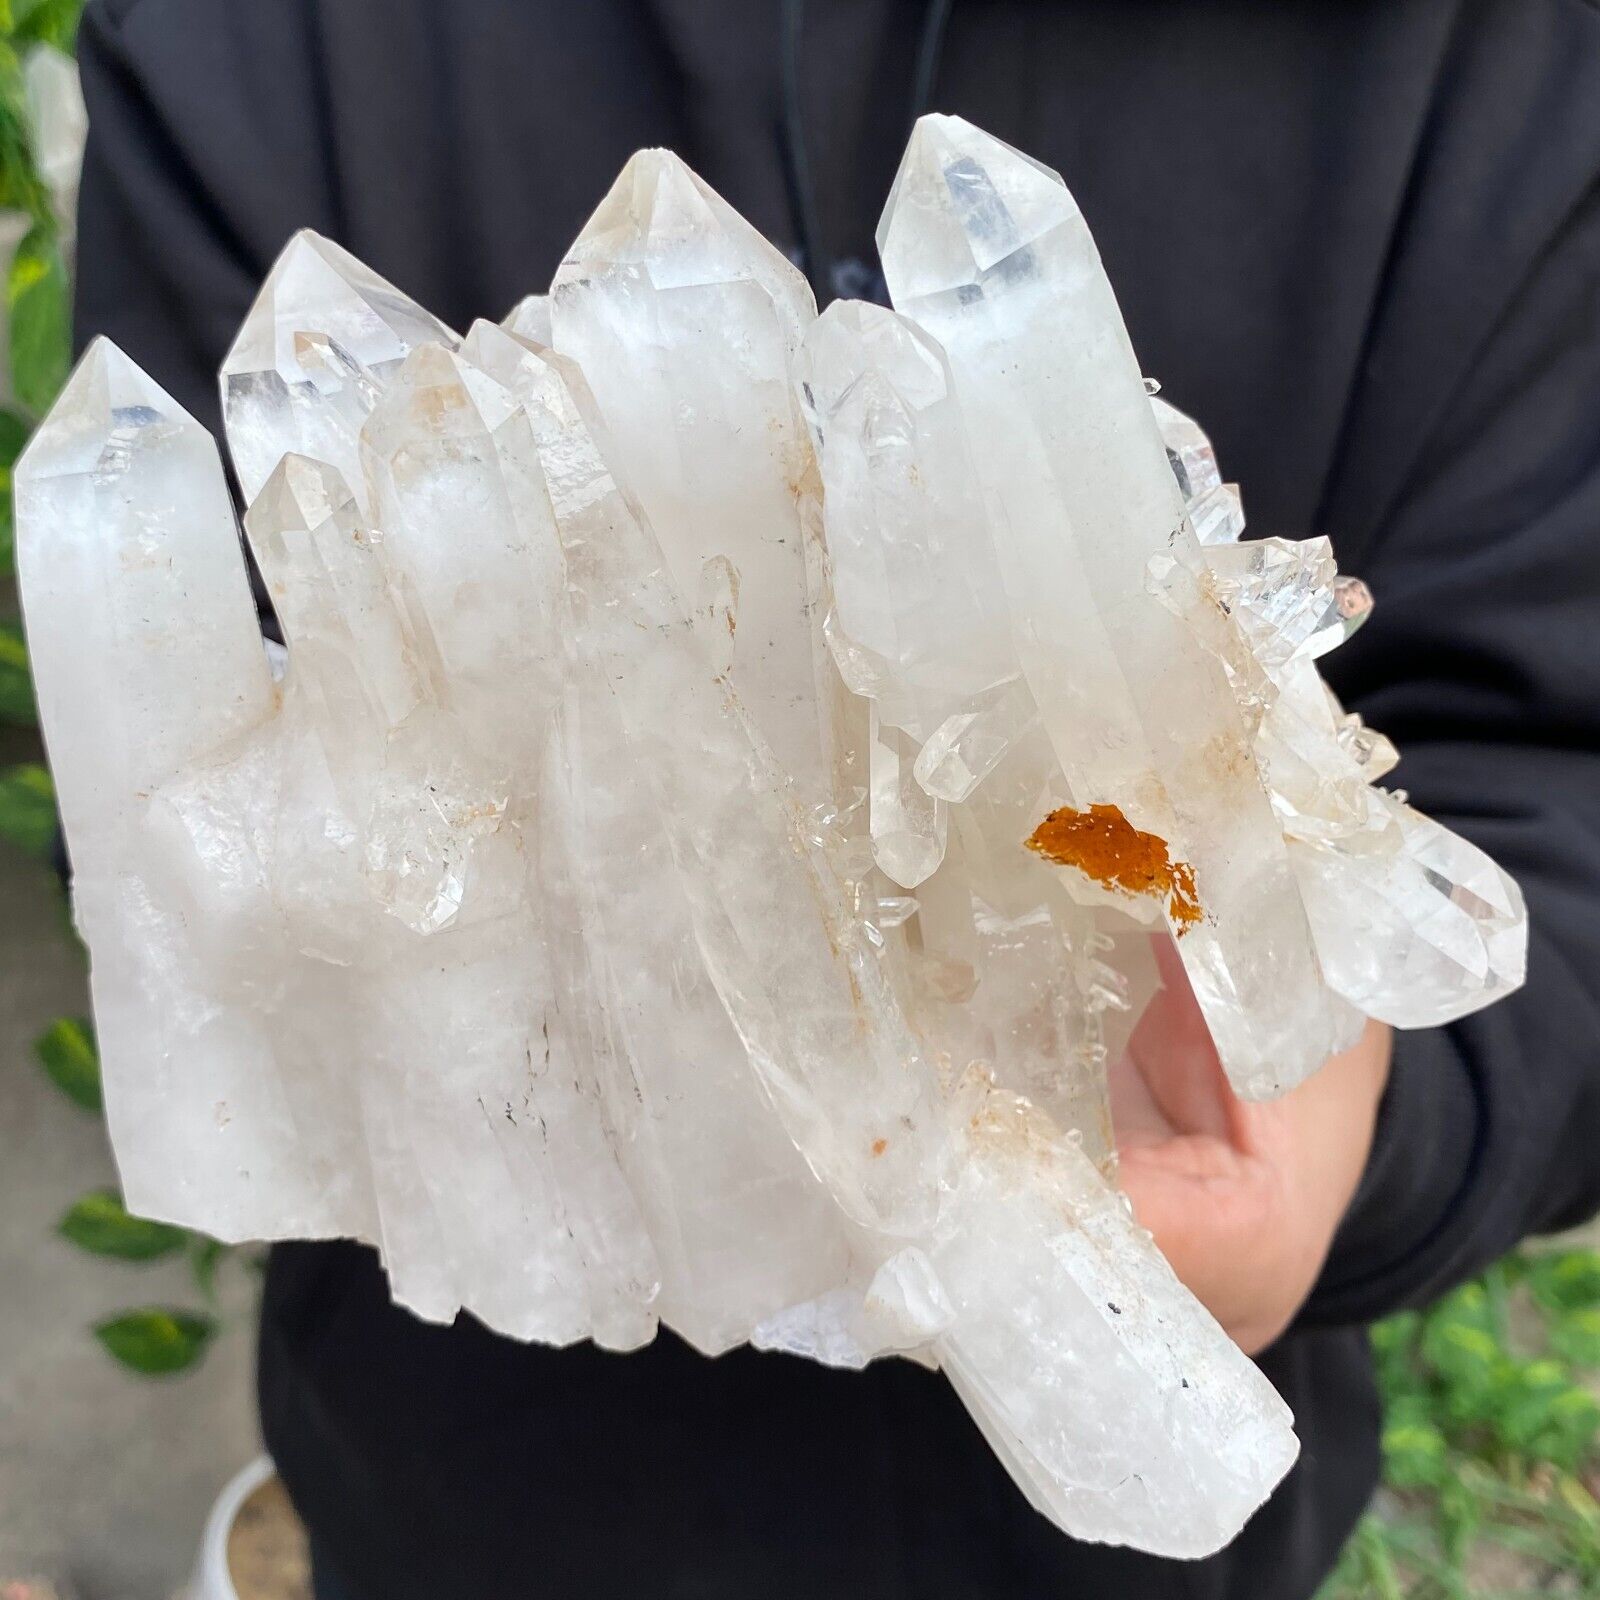 3.7lb A++Large Natural clear white Crystal Himalayan quartz cluster /mineralsls